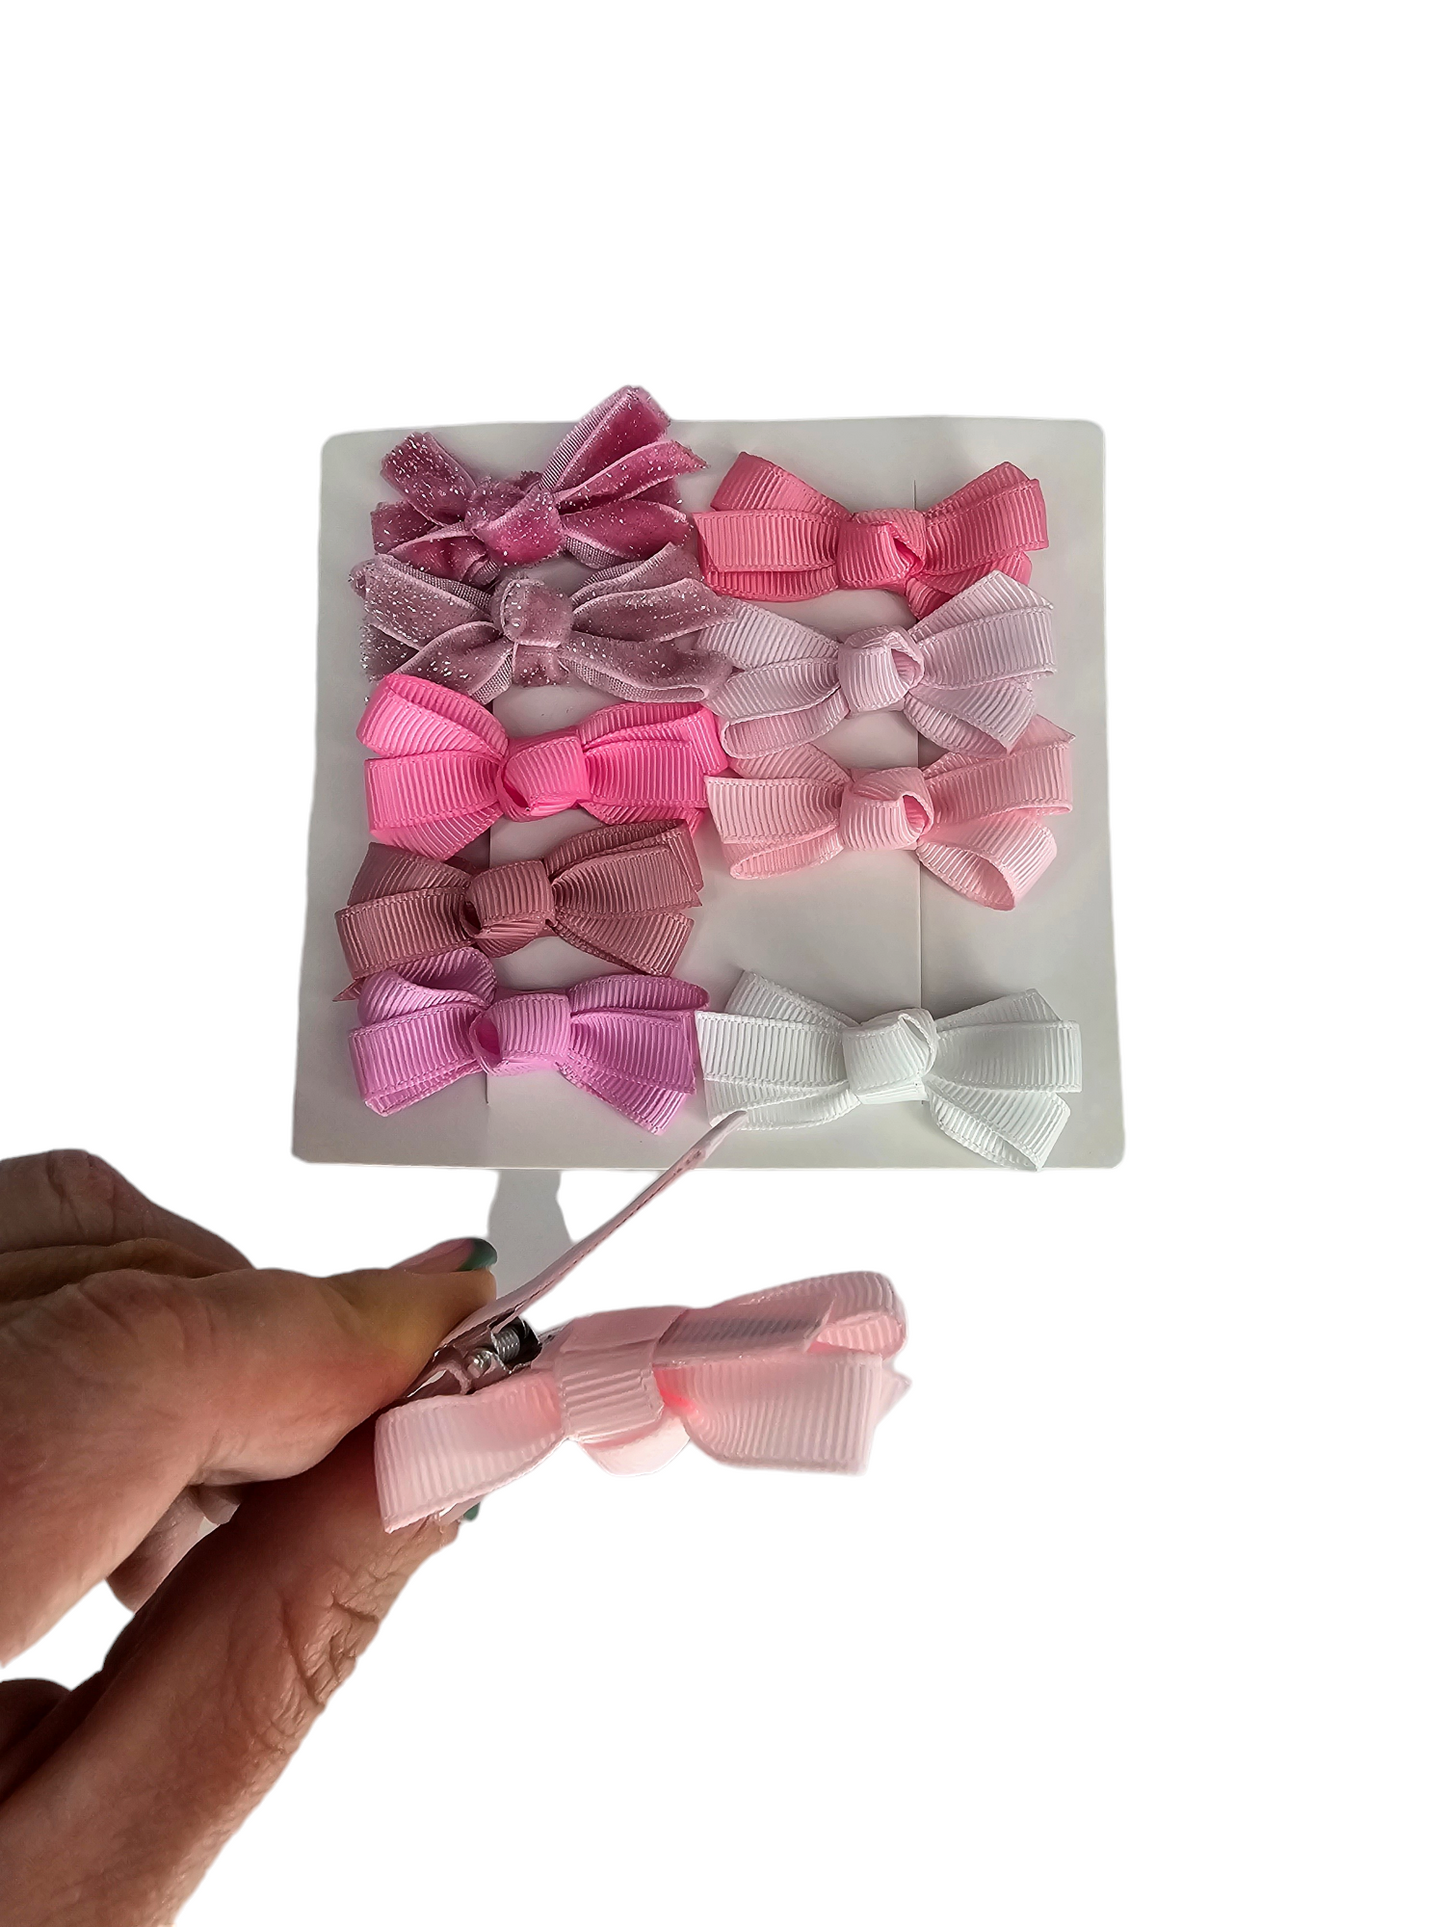 Pink Sparkle Pack of 10 My First 2 inch Bow Clips - Betty Brown Boutique Ltd